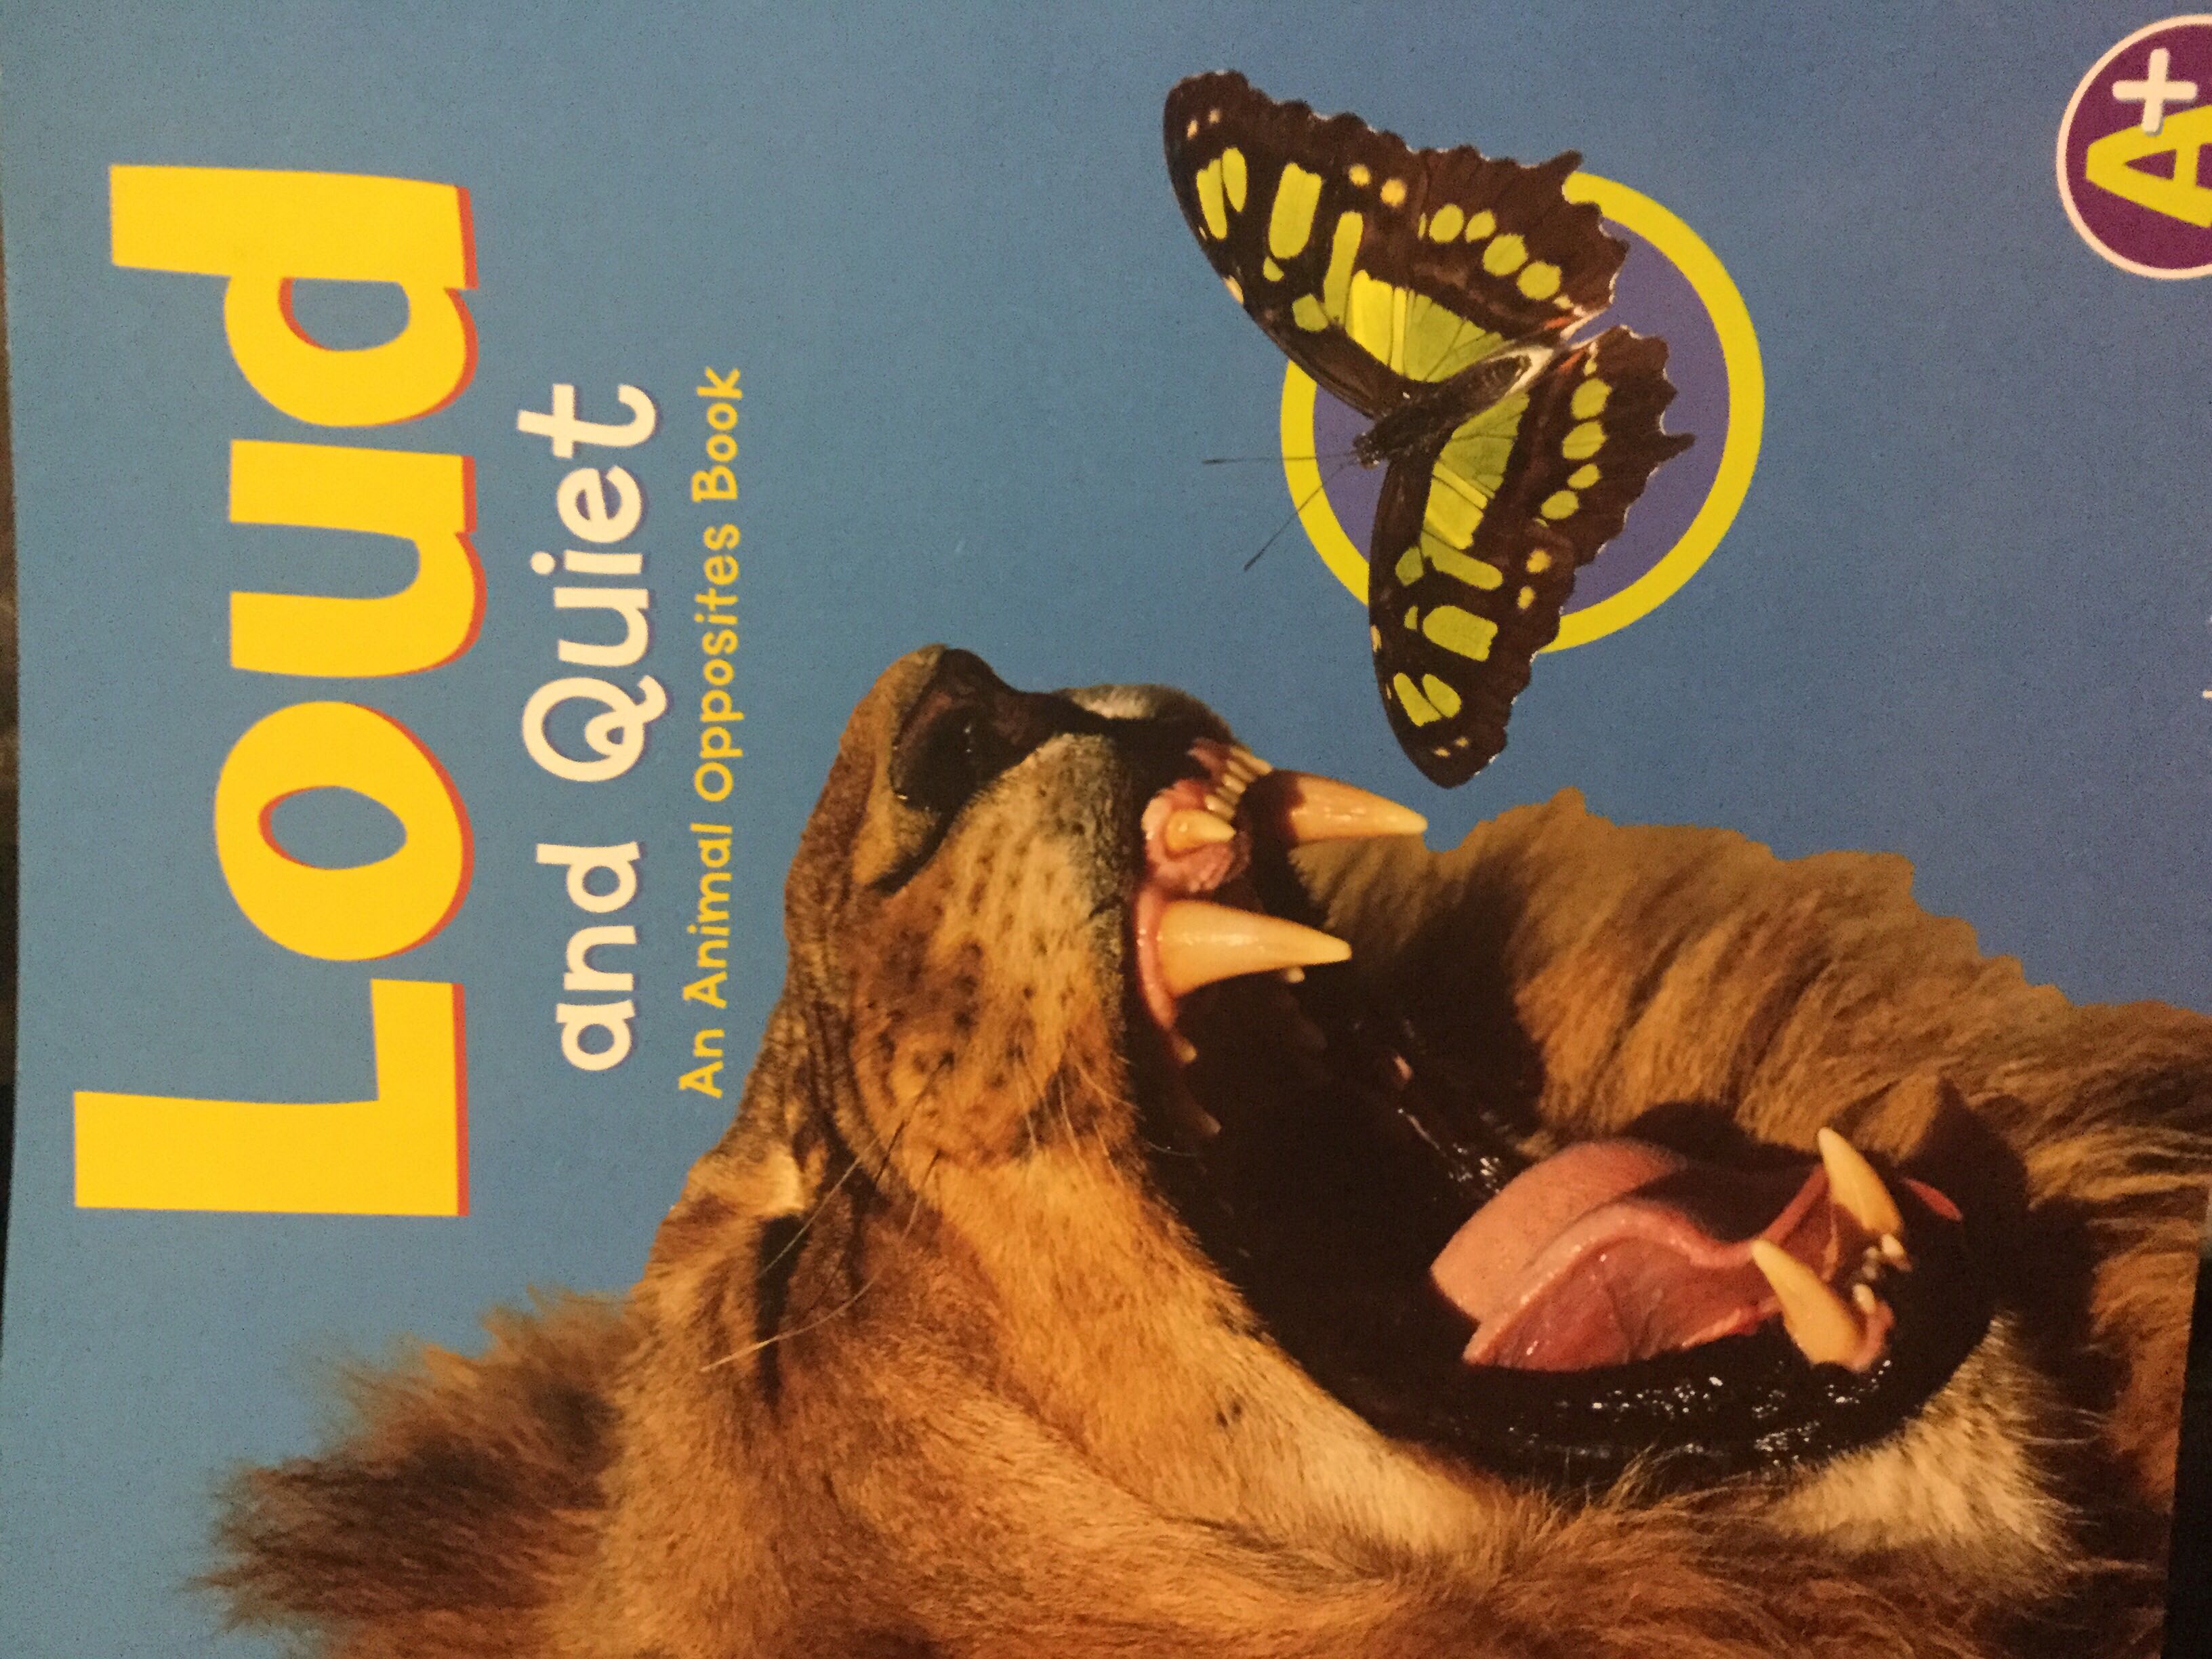 Loud And Quiet - Eric Carle (HMH Books - Paperback) book collectible [Barcode 9781429642323] - Main Image 2